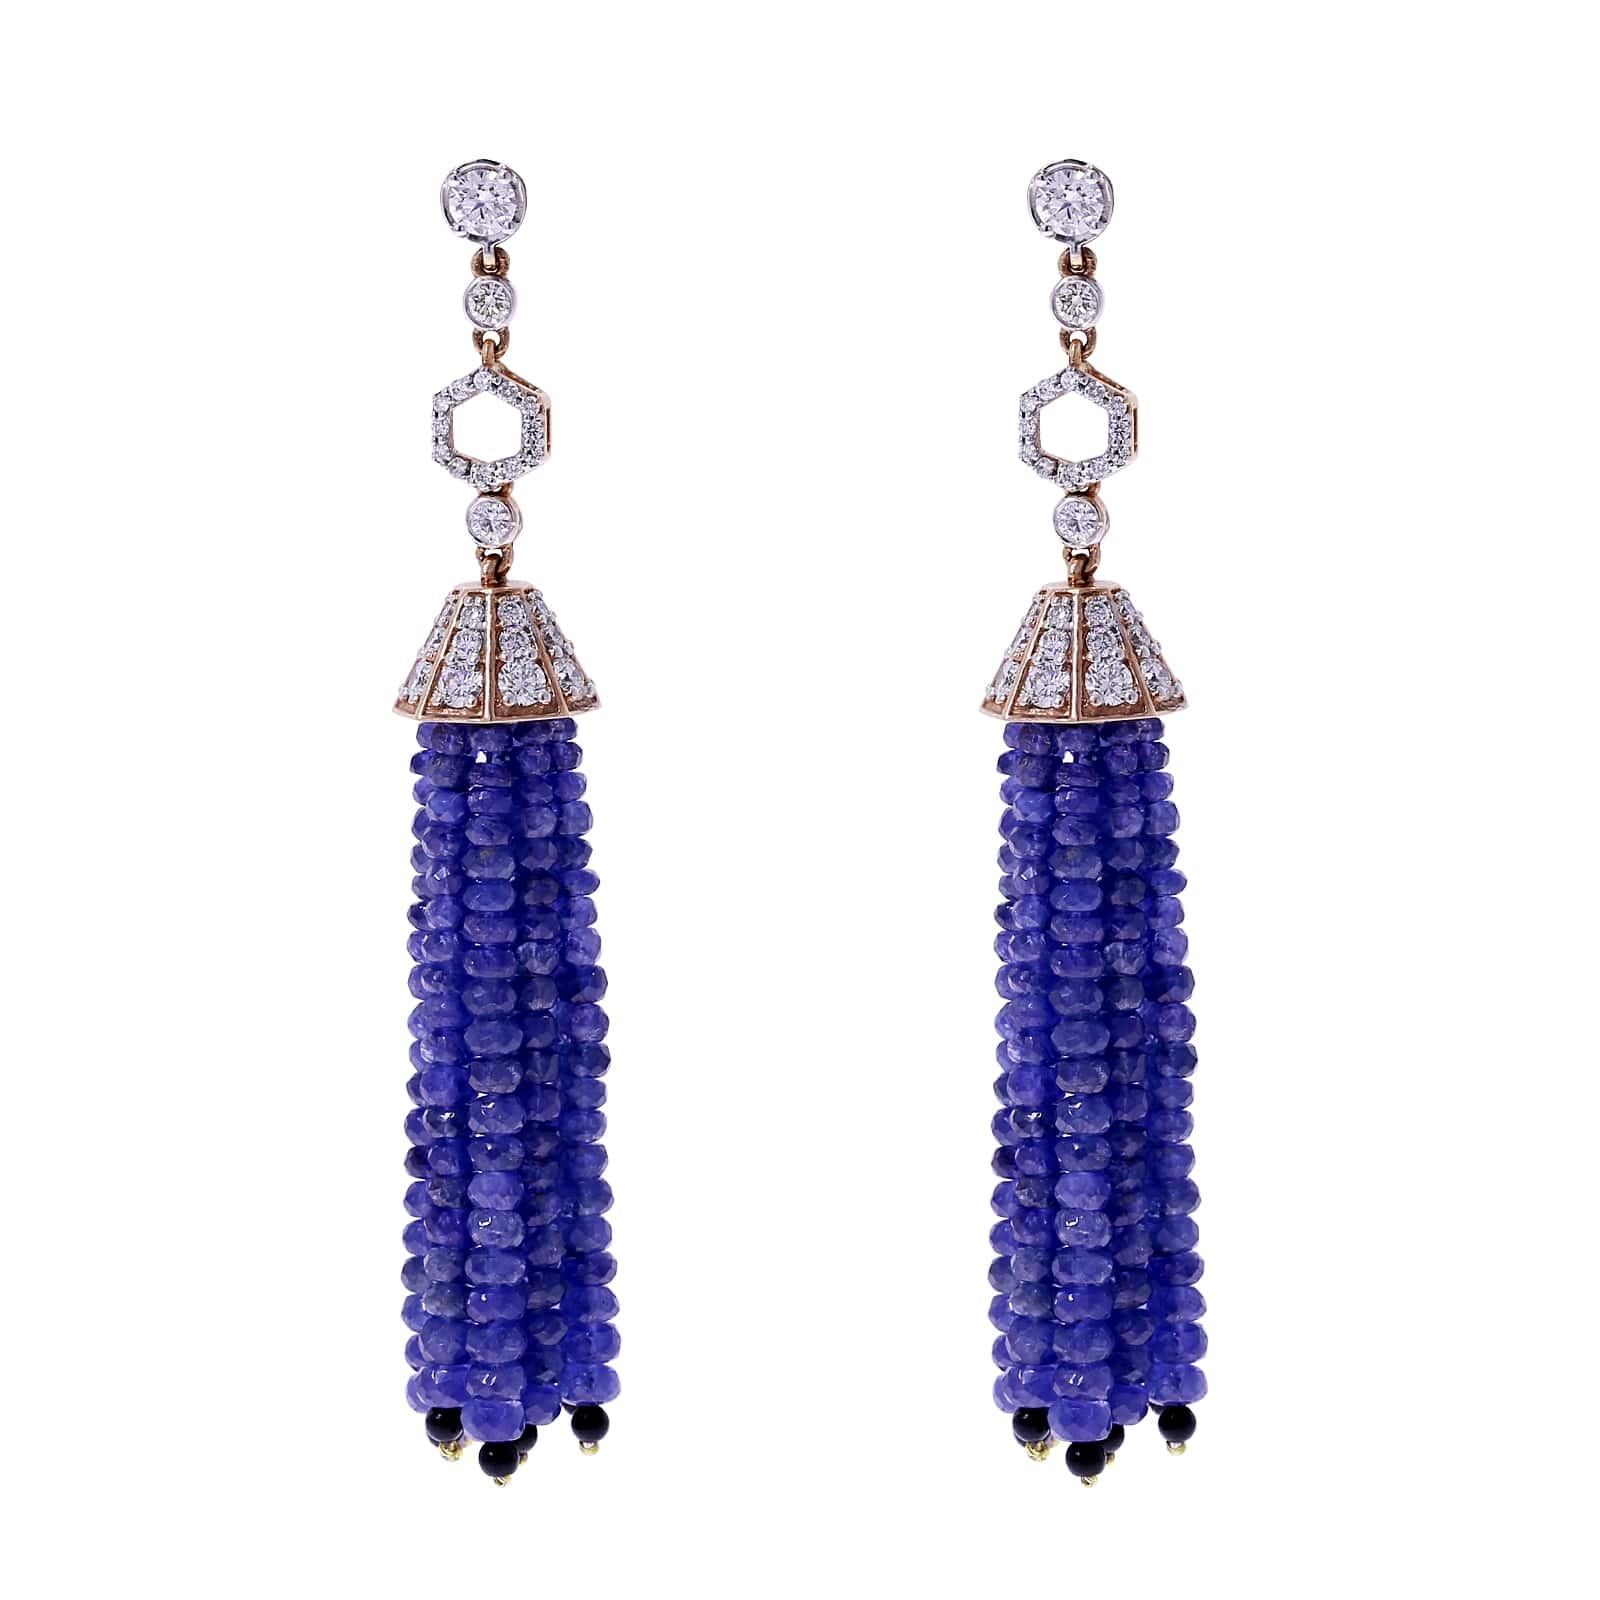 A beautiful work of art with Faceted Sapphire Bead Tassels with Diamonds and Onyx. There are 89.51 cts. of Sapphire, 1.64 cts of Onyx, and 3.33 cts of Diamonds The earrings weighs 28.29 grams.
